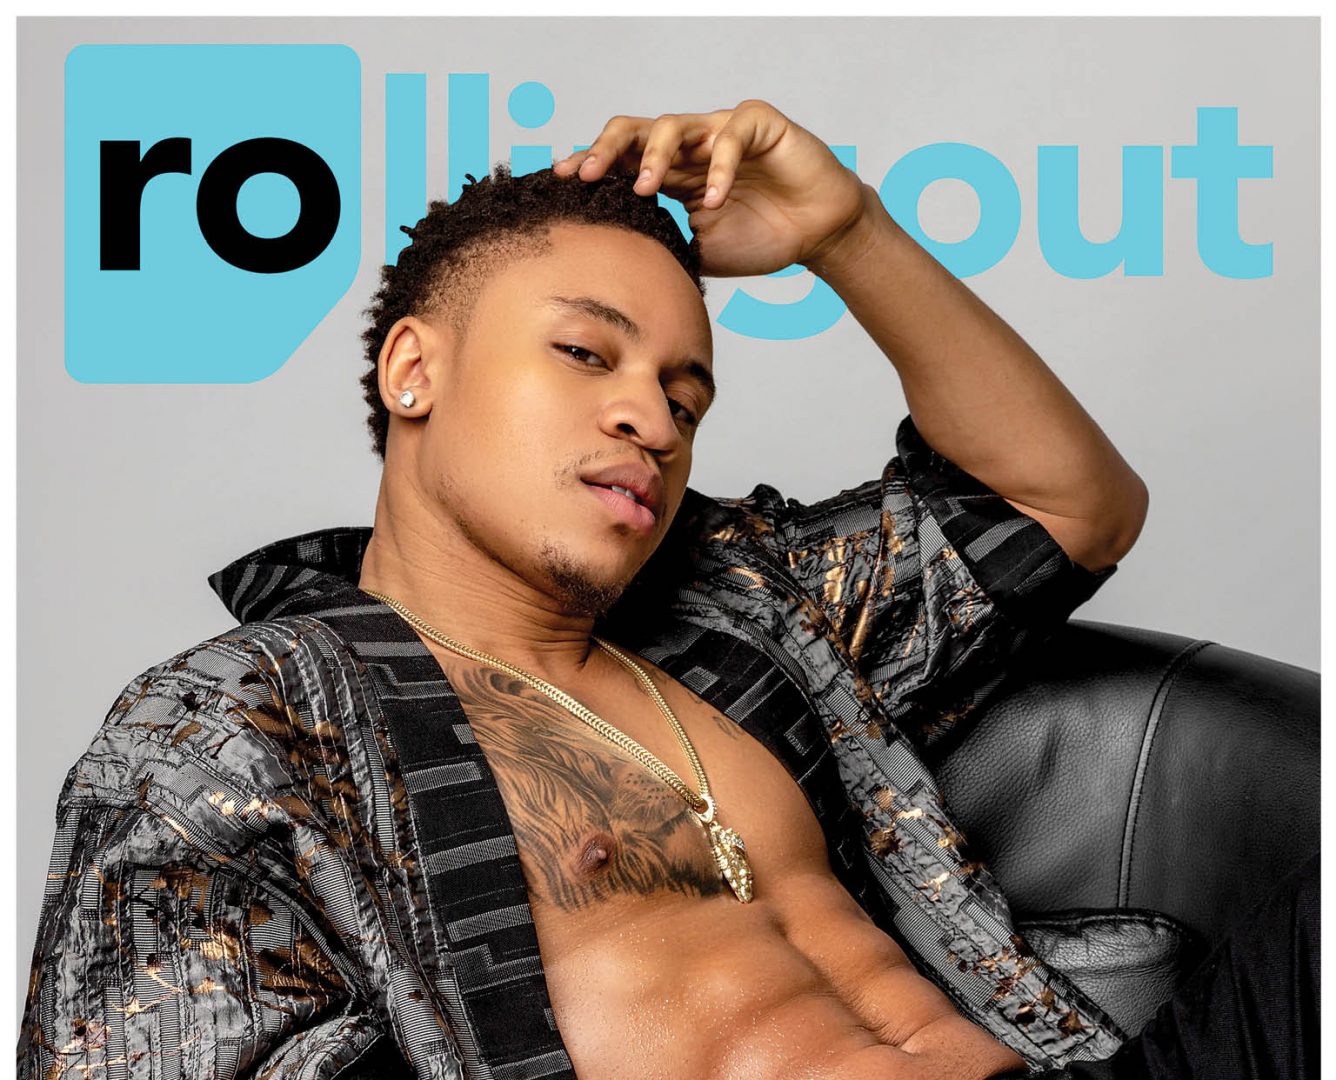 Rotimi thrives on 'Power' and in real life.